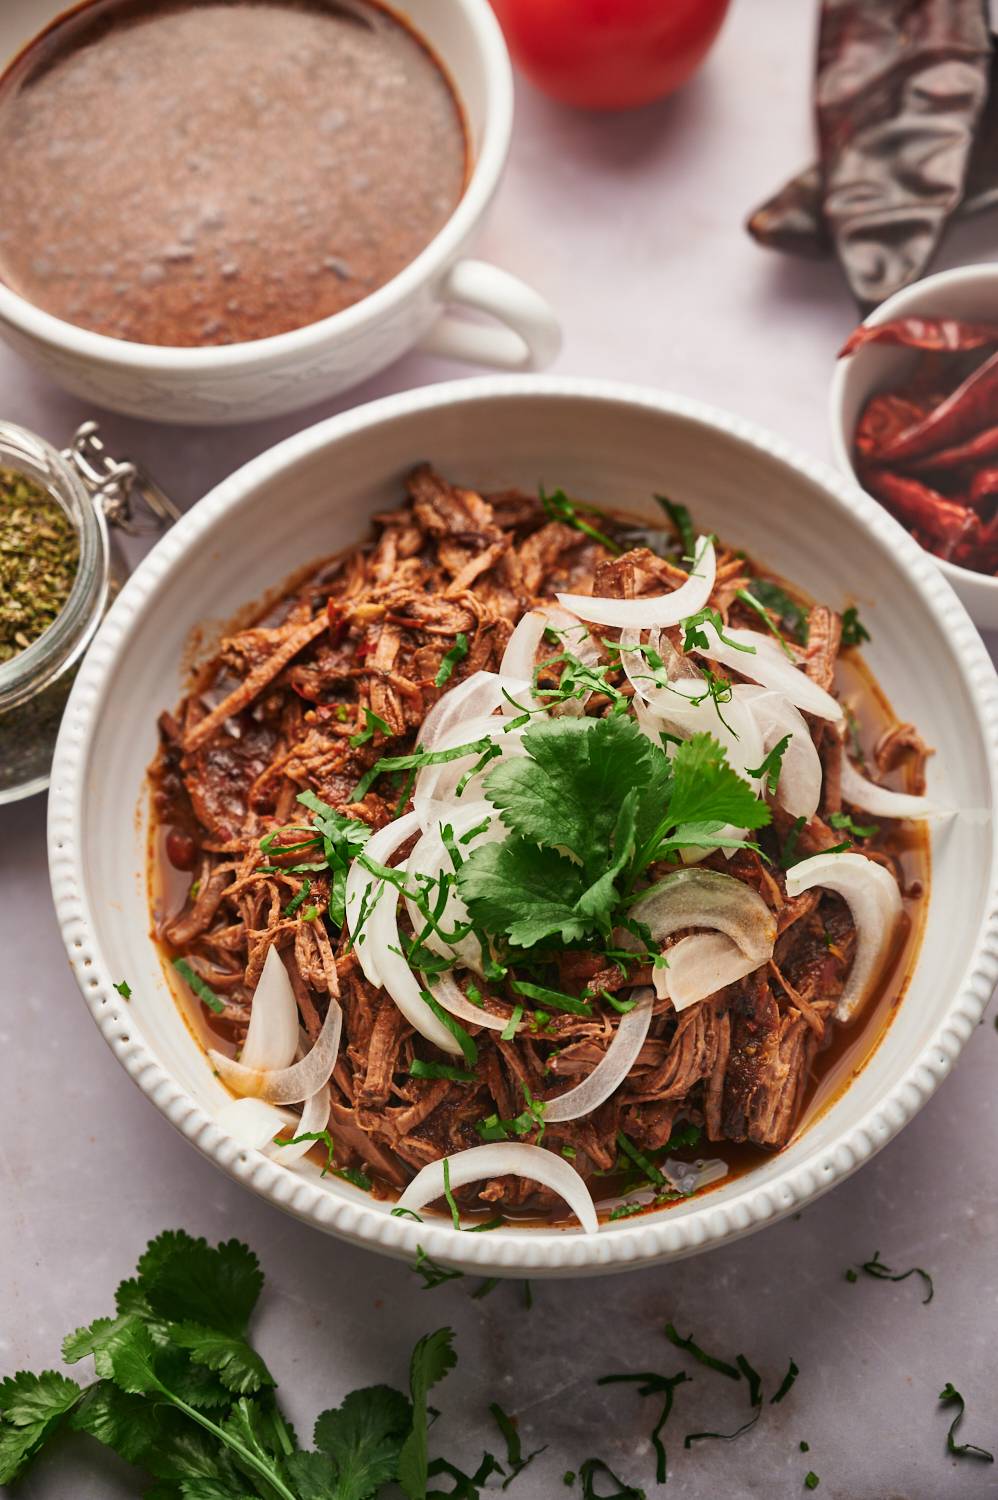 Beef birria in a bowl with a dried chili pepper sauce, white onion, and cilantro.